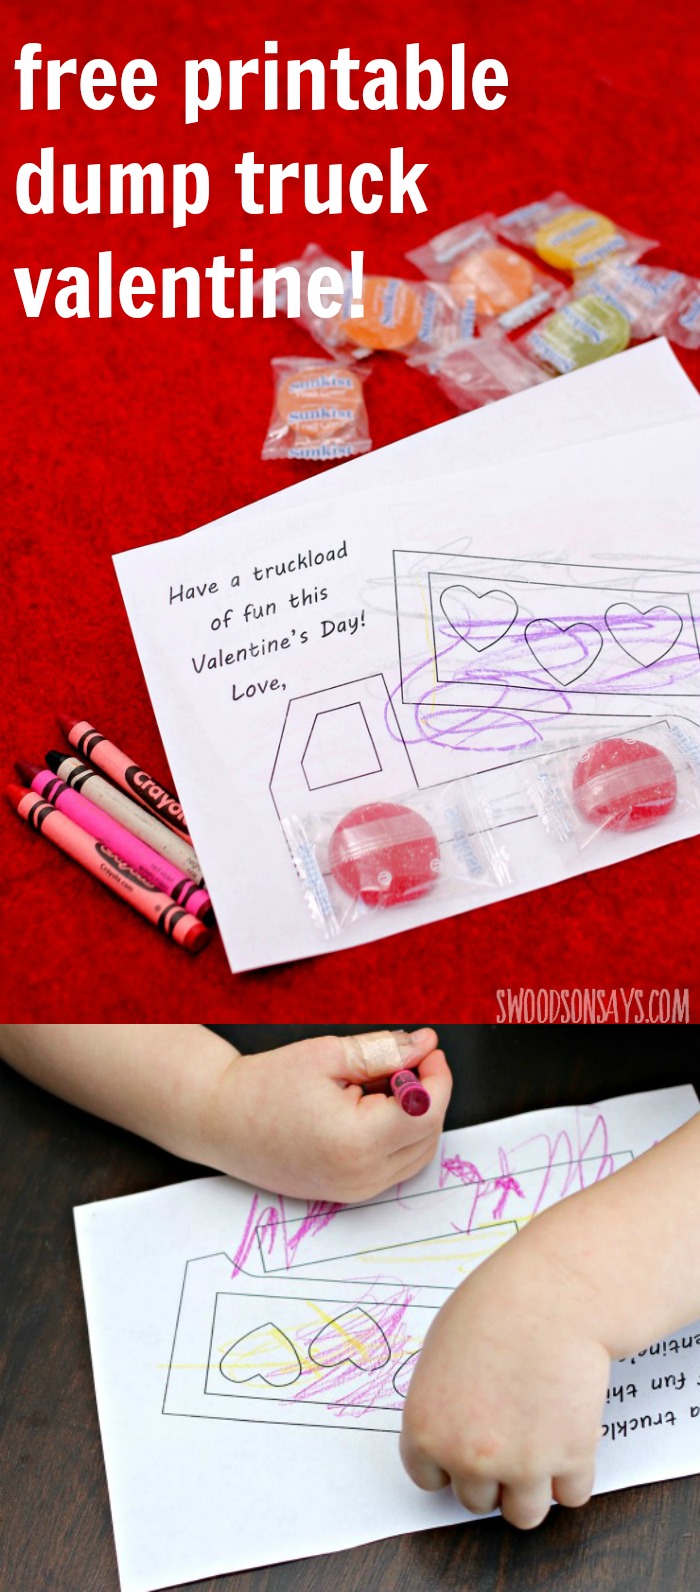 free truck coloring printable for valentines day - fun DIY truck valentine idea for toddlers and preschoolers to make themselves and give to their buddies!